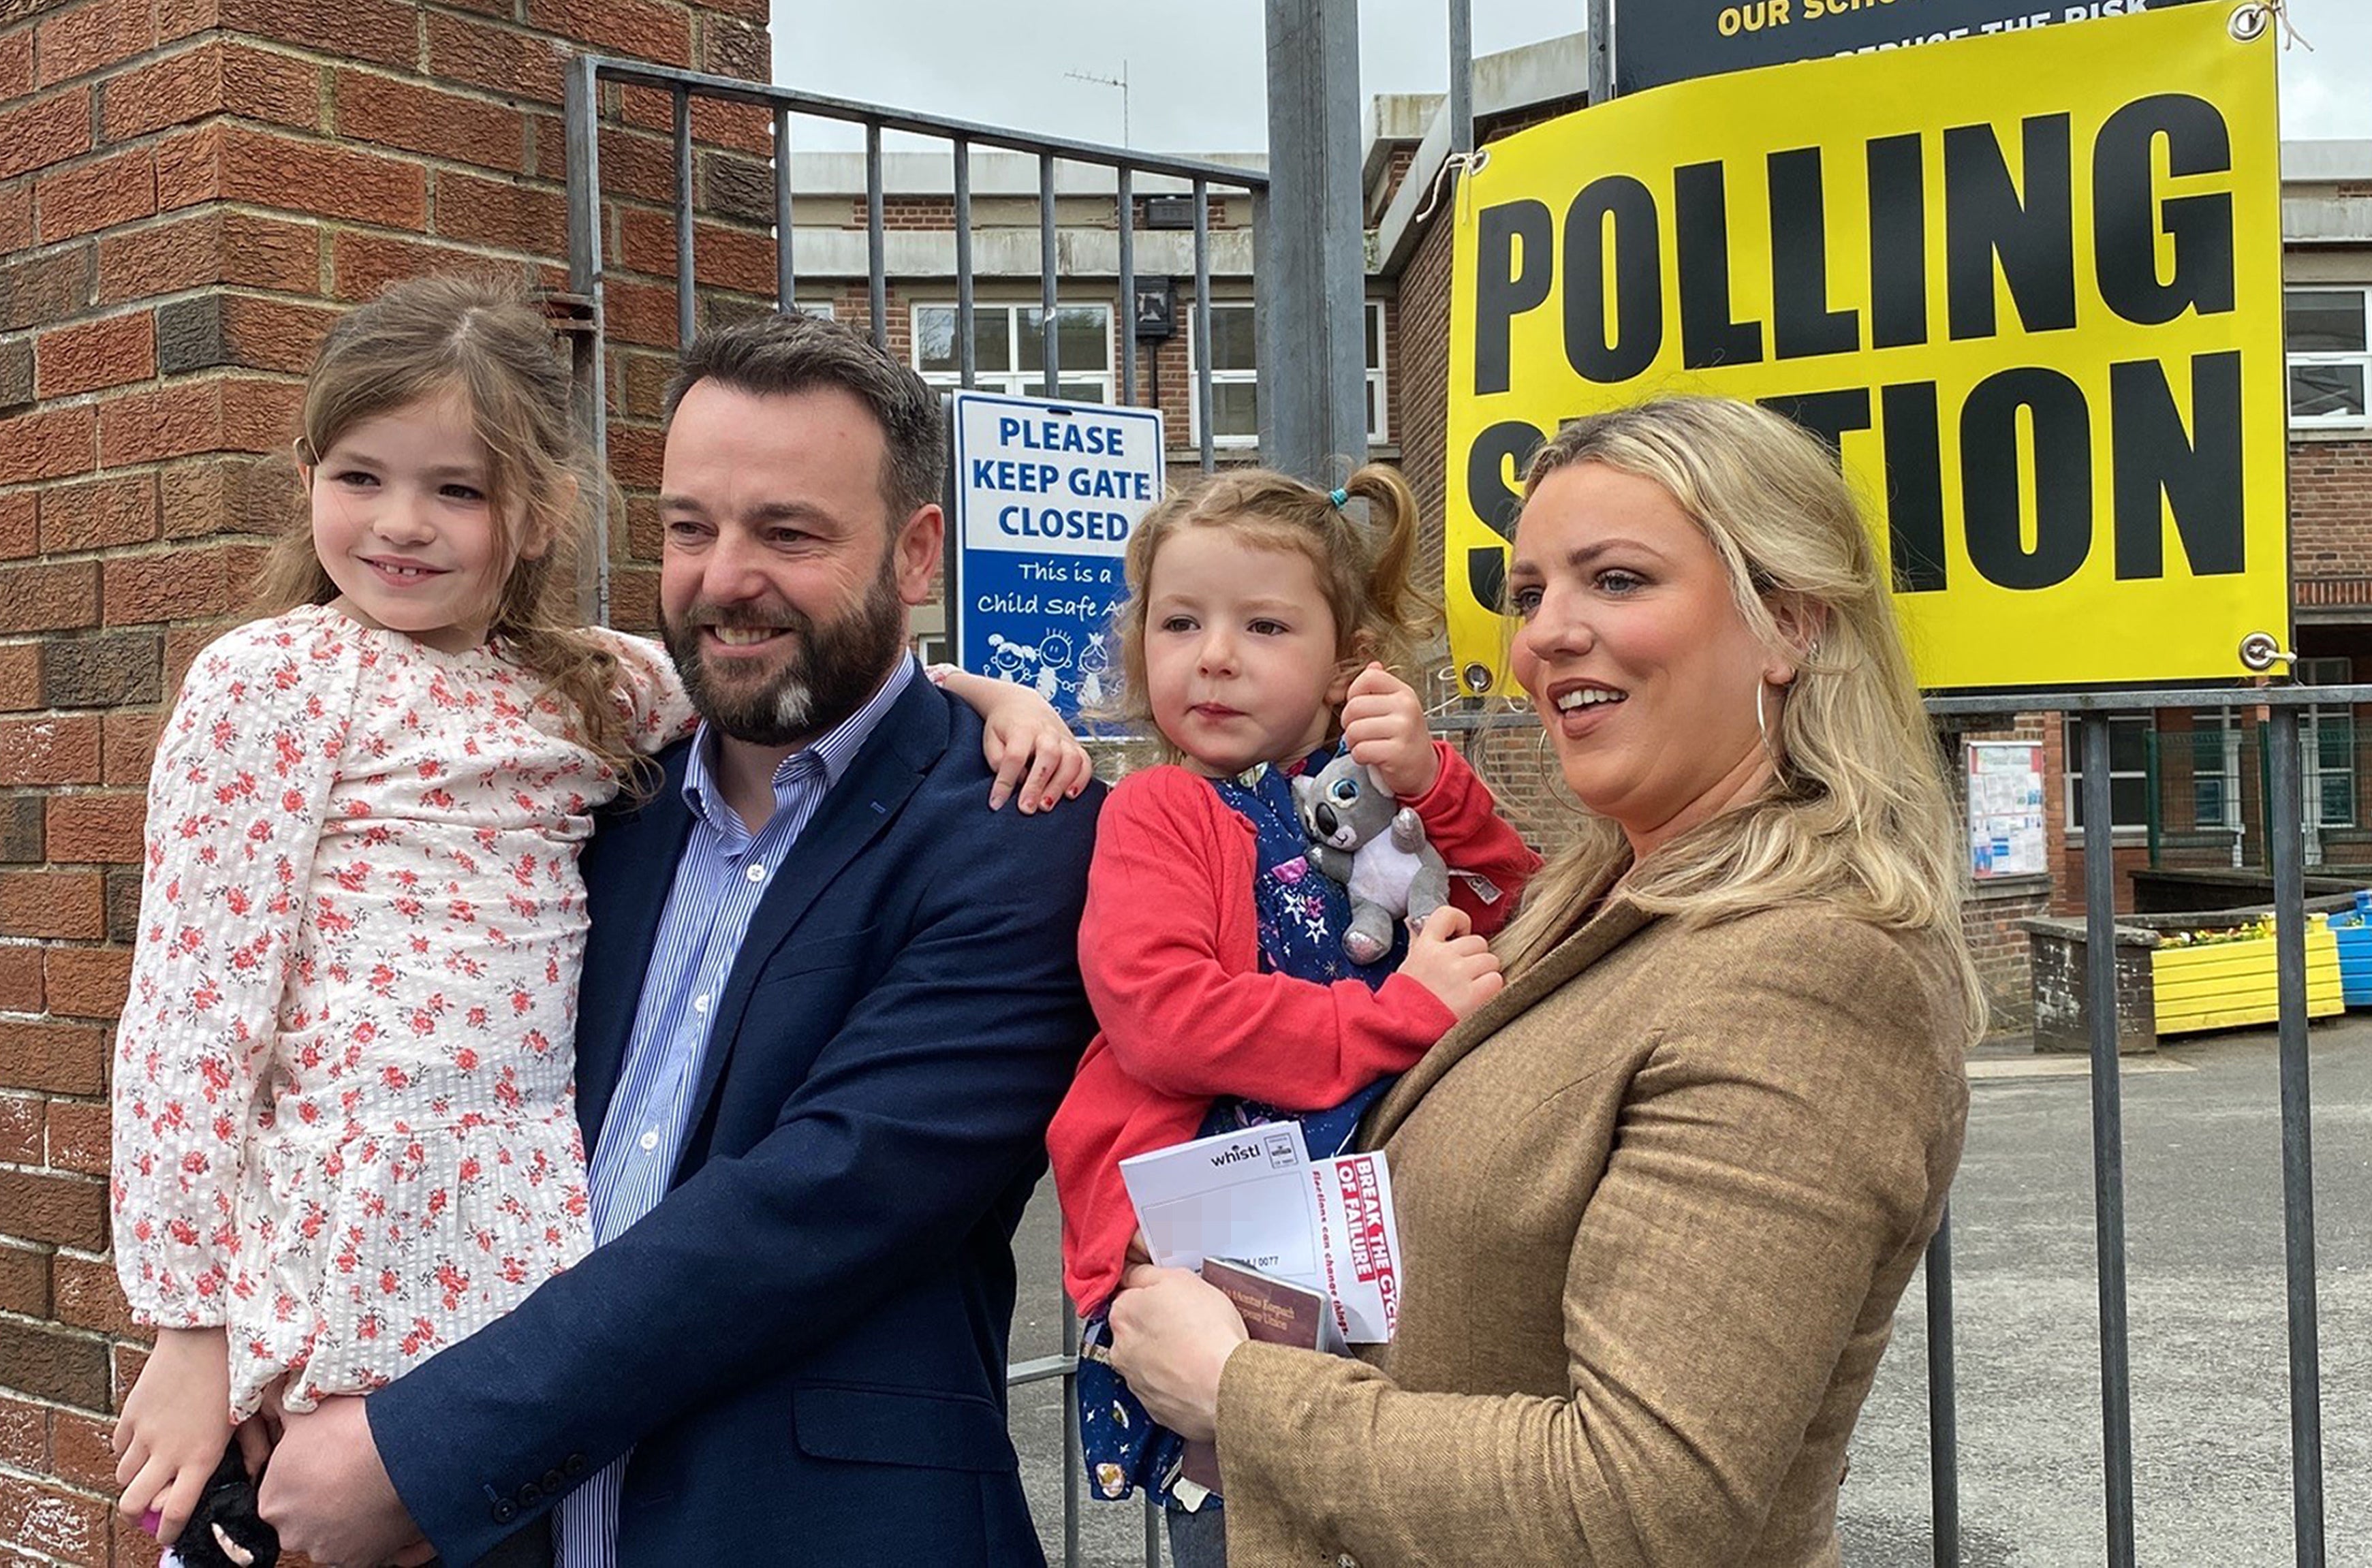 SDLP leader Colum Eastwood arrives to cast their vote in the 2022 NI Assembly election with his wife Rachael and children, Rosa, six, and Maya, four, in the Foyle constituency in Londonderry (Dominic McGrath/PA)